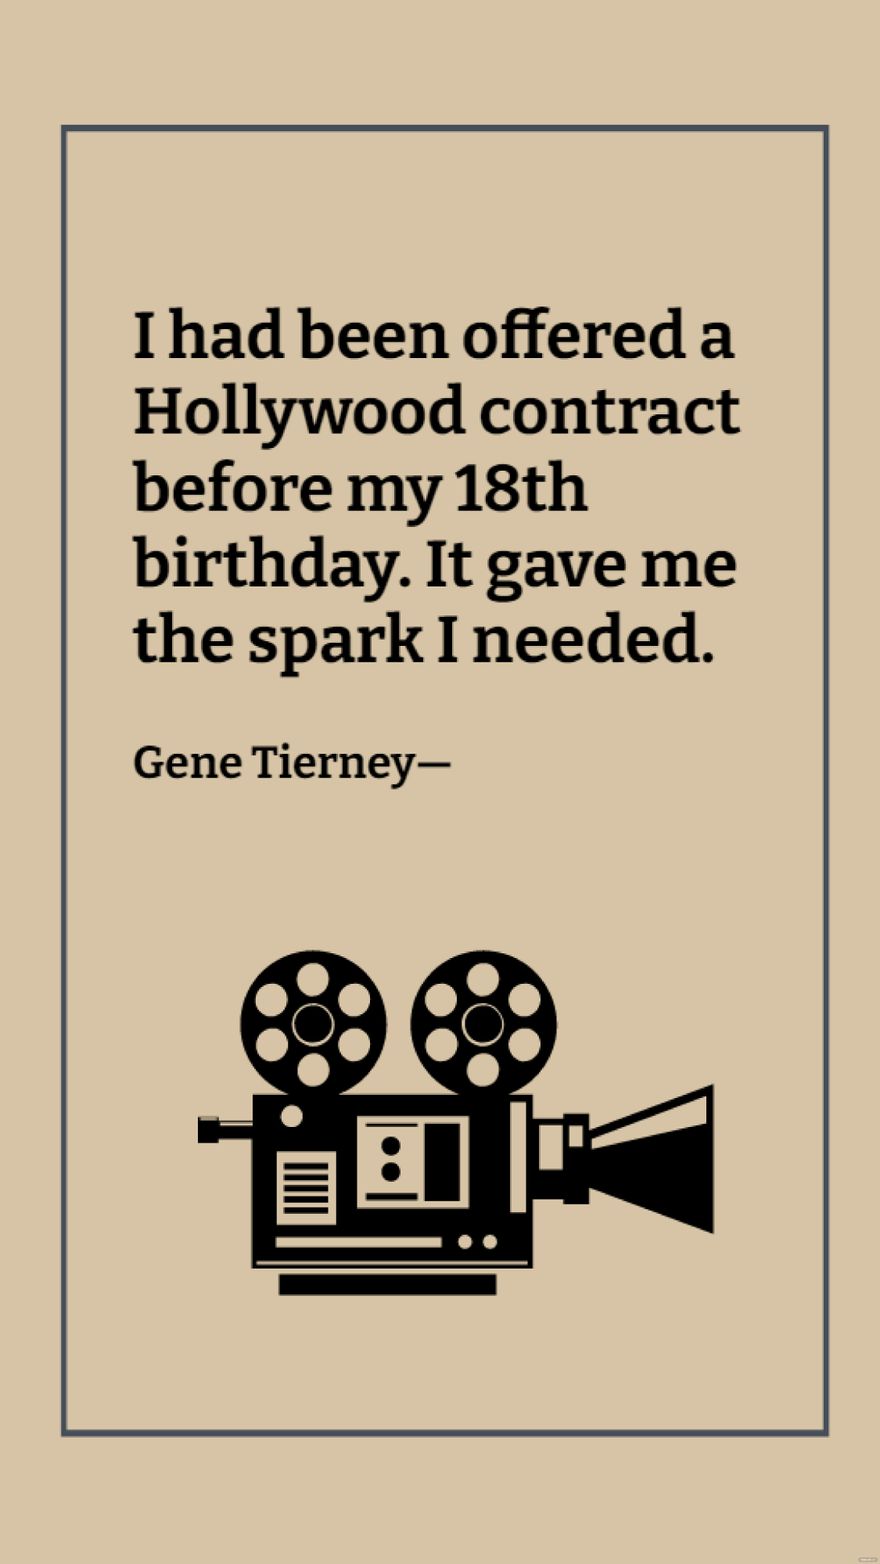 Free Gene Tierney - I had been offered a Hollywood contract before my 18th birthday. It gave me the spark I needed.